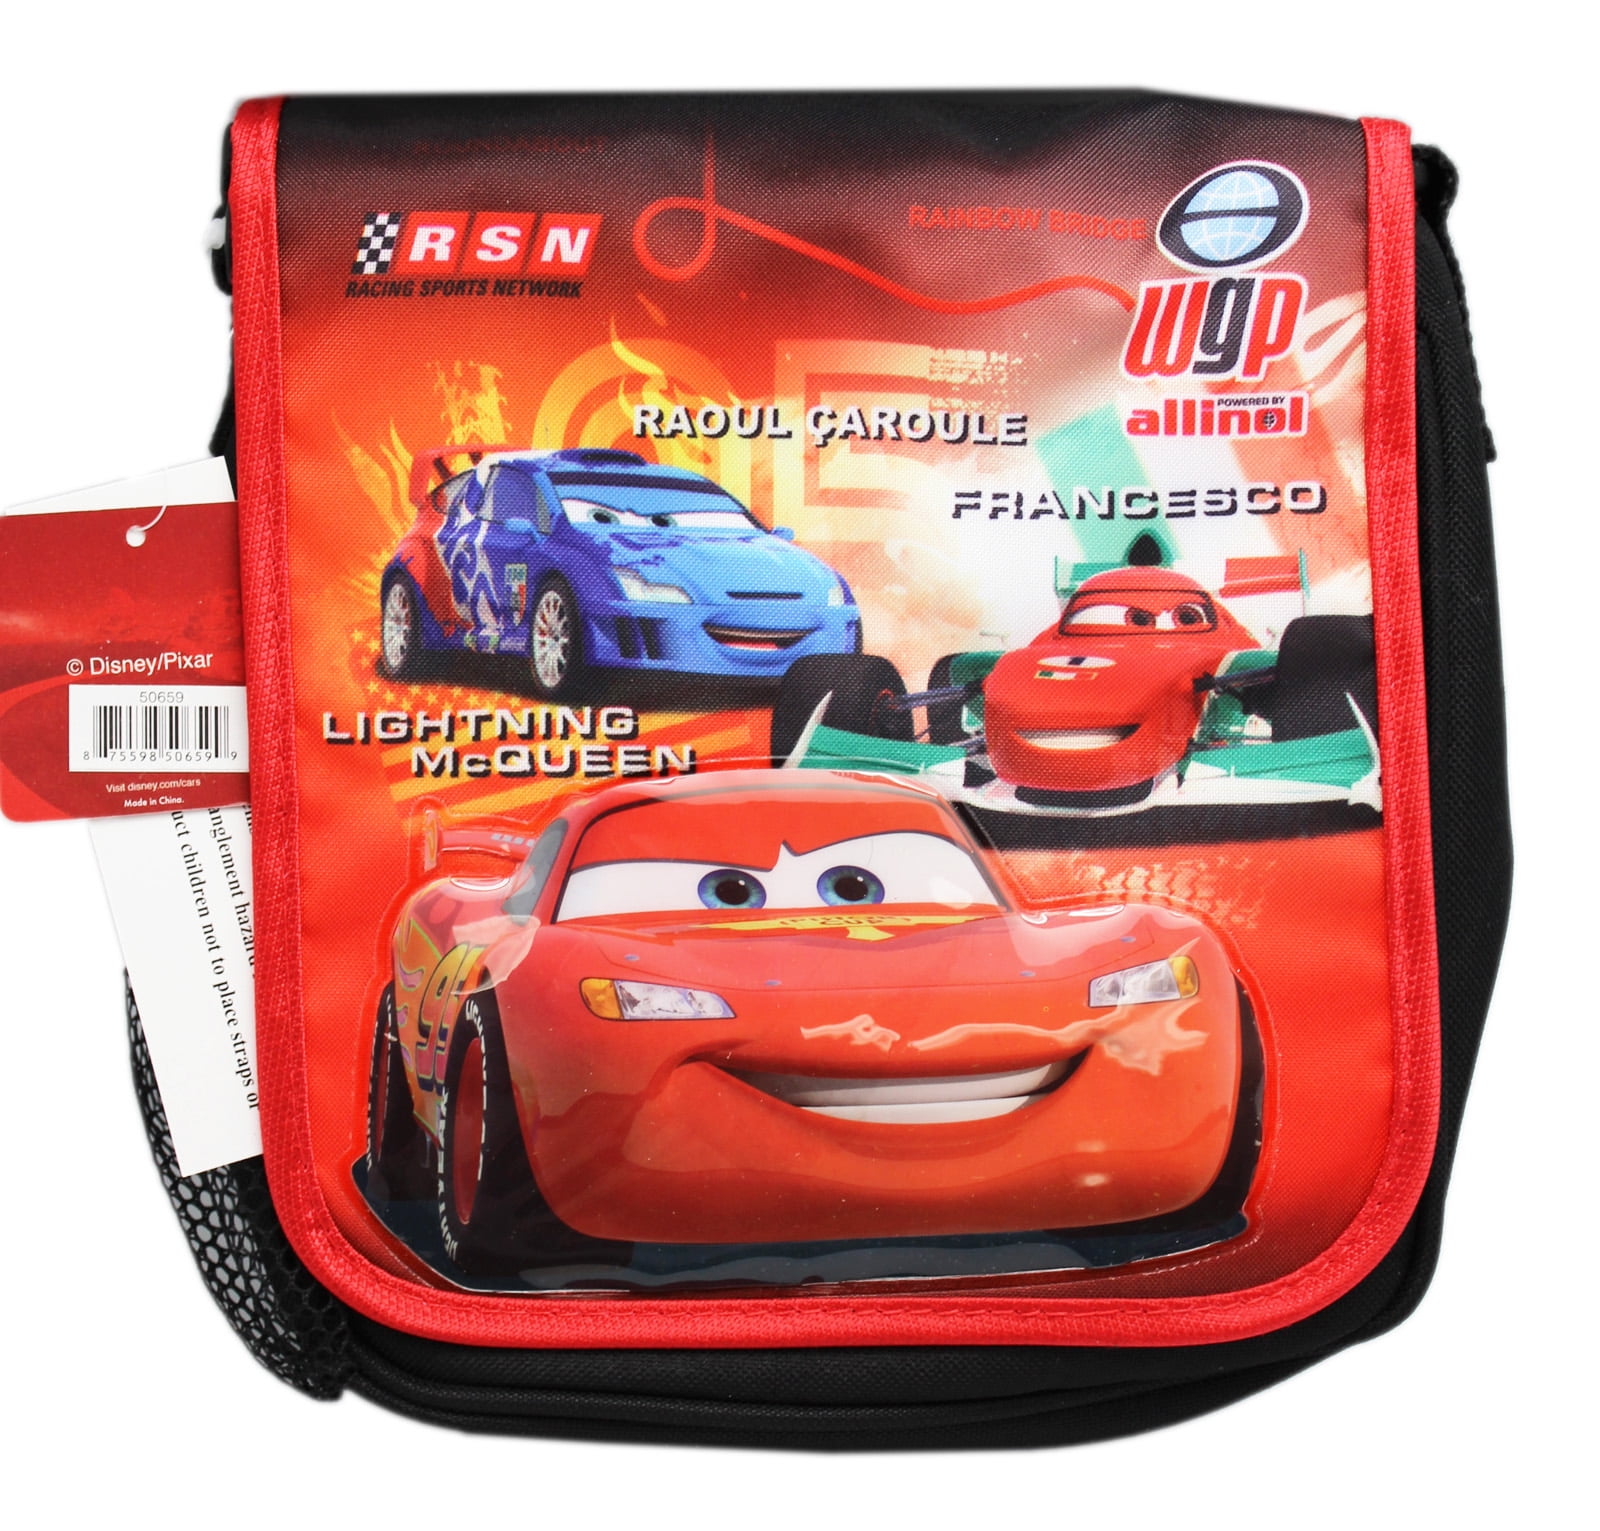 The Cars Lunch Bag No.95 McQueen Picnic Food Storage Cooler School Lunch Bag Box